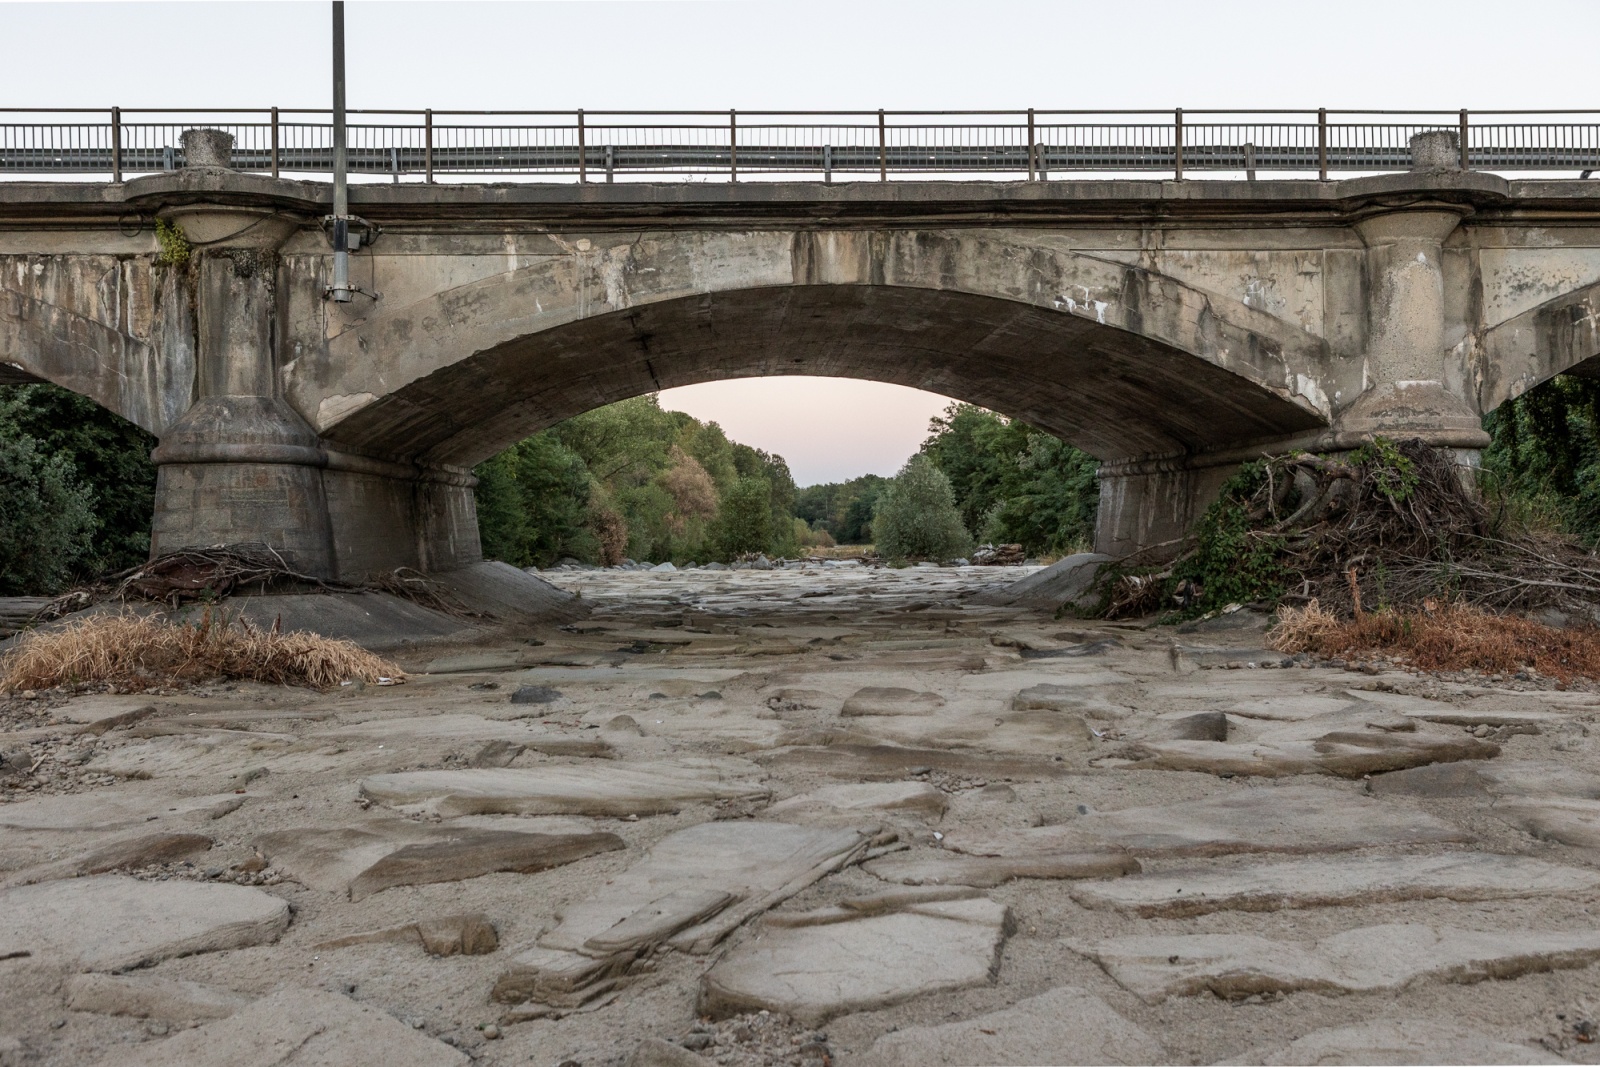 PIEDMONT, ITALY - JUNE 2022 - A photo shows the dry bed of the Sangone river and one of the bridges that cross it in the municipality of Beinasco, in the province of Turin, Italy on June 24, 2022.